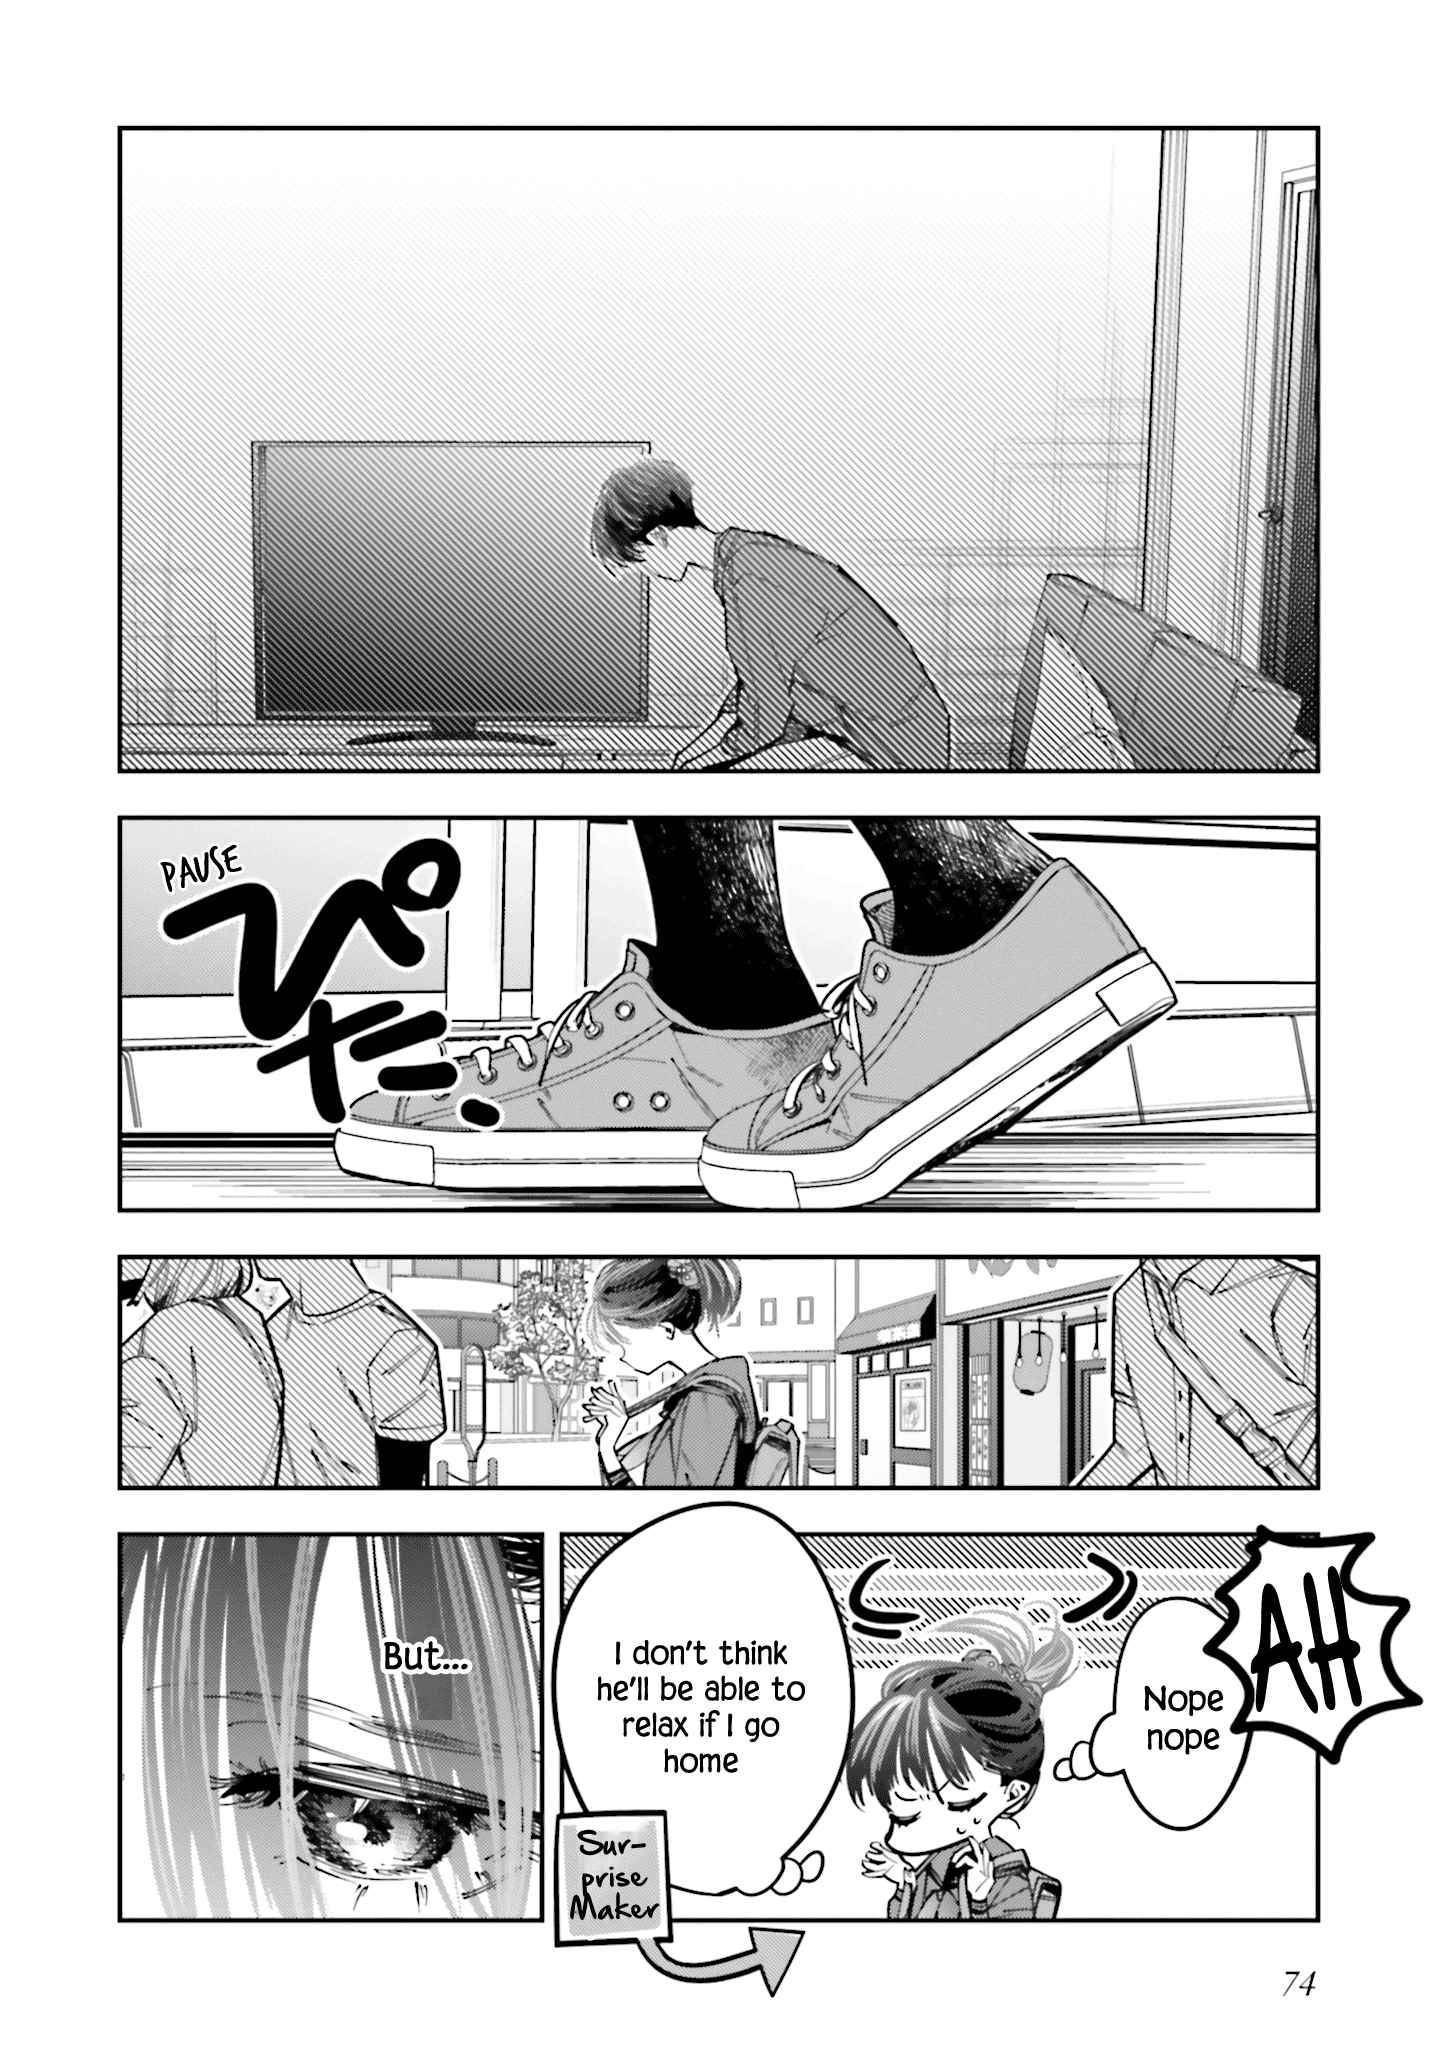 I Reincarnated As The Little Sister Of A Death Game Manga’S Murd3R Mastermind And Failed - chapter 12 - #6